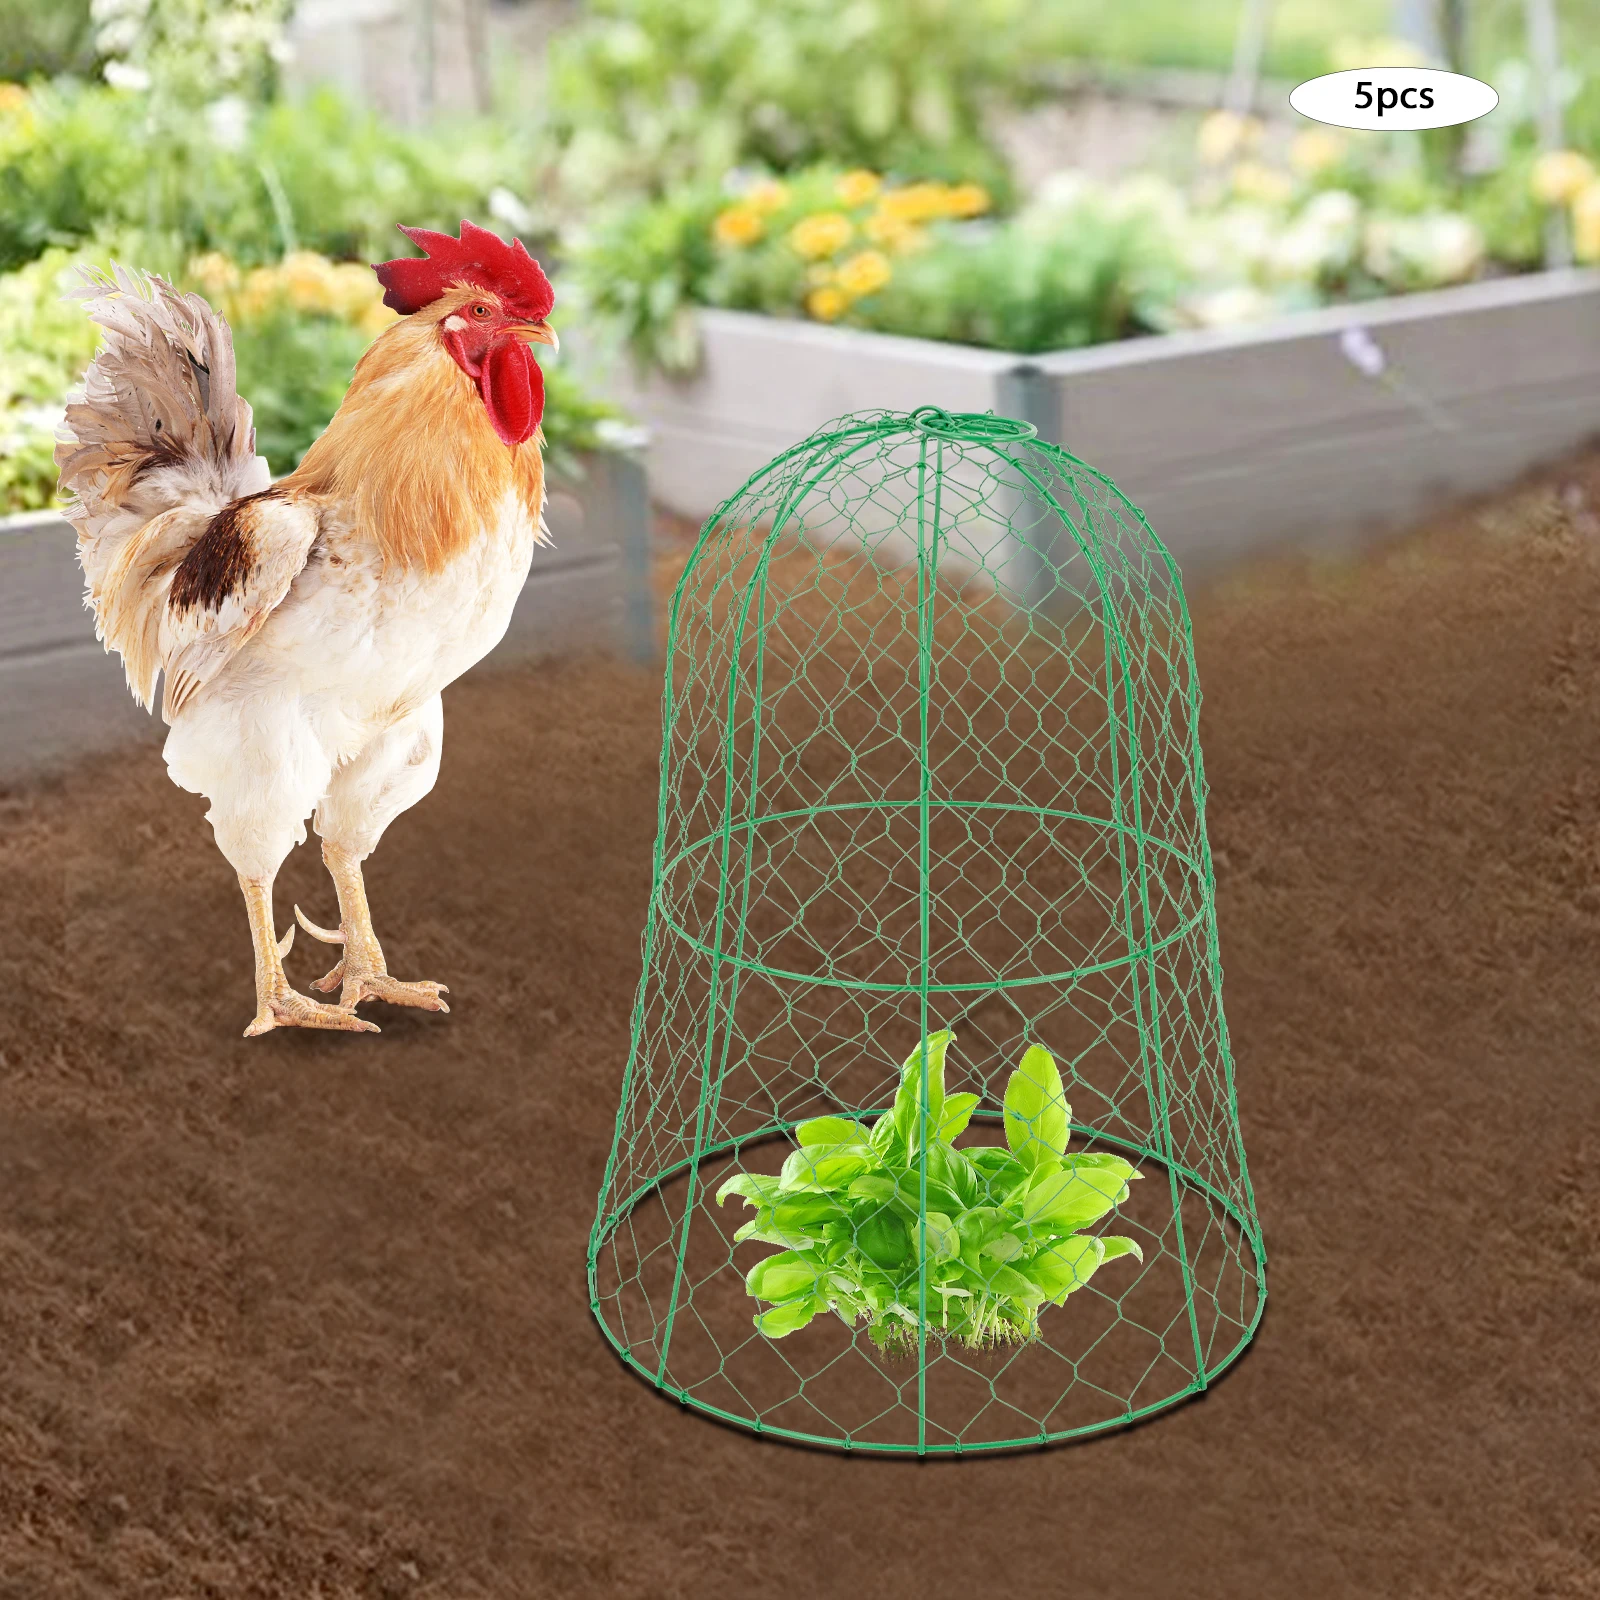 

5 Pack Garden Chicken Wire Cloche Plant Protector Cover Strong Metal Cloches (5 Packs) 12.99" Diameter x 15.75" Height Garden